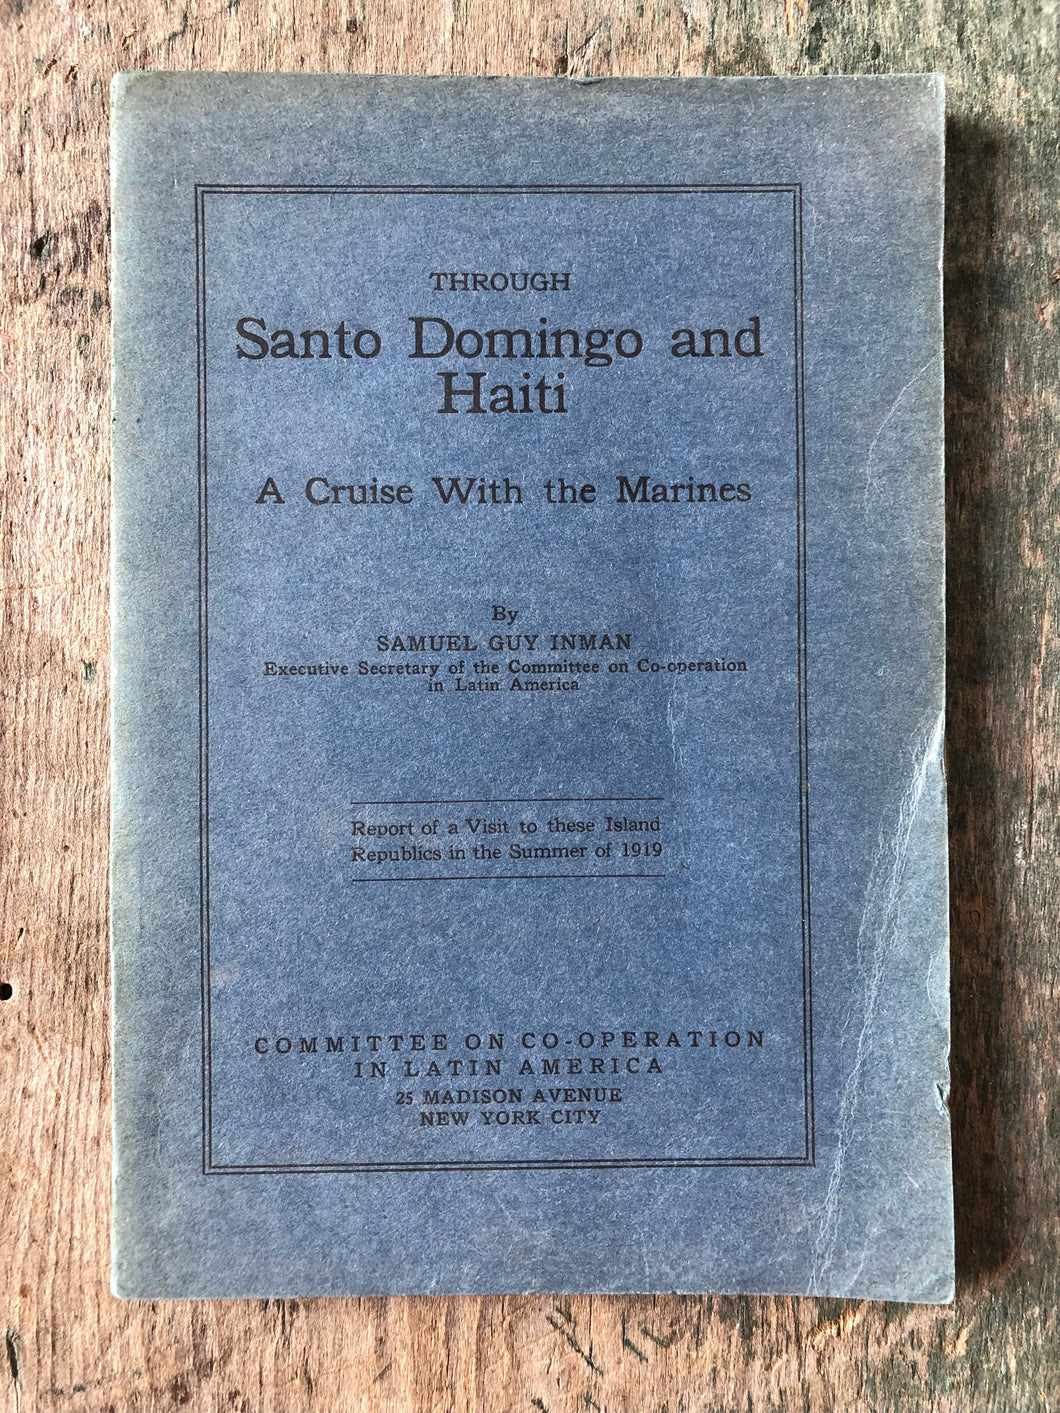 Through Santo Domingo and Haiti: A Cruise With the Marines by Samuel Guy Inman